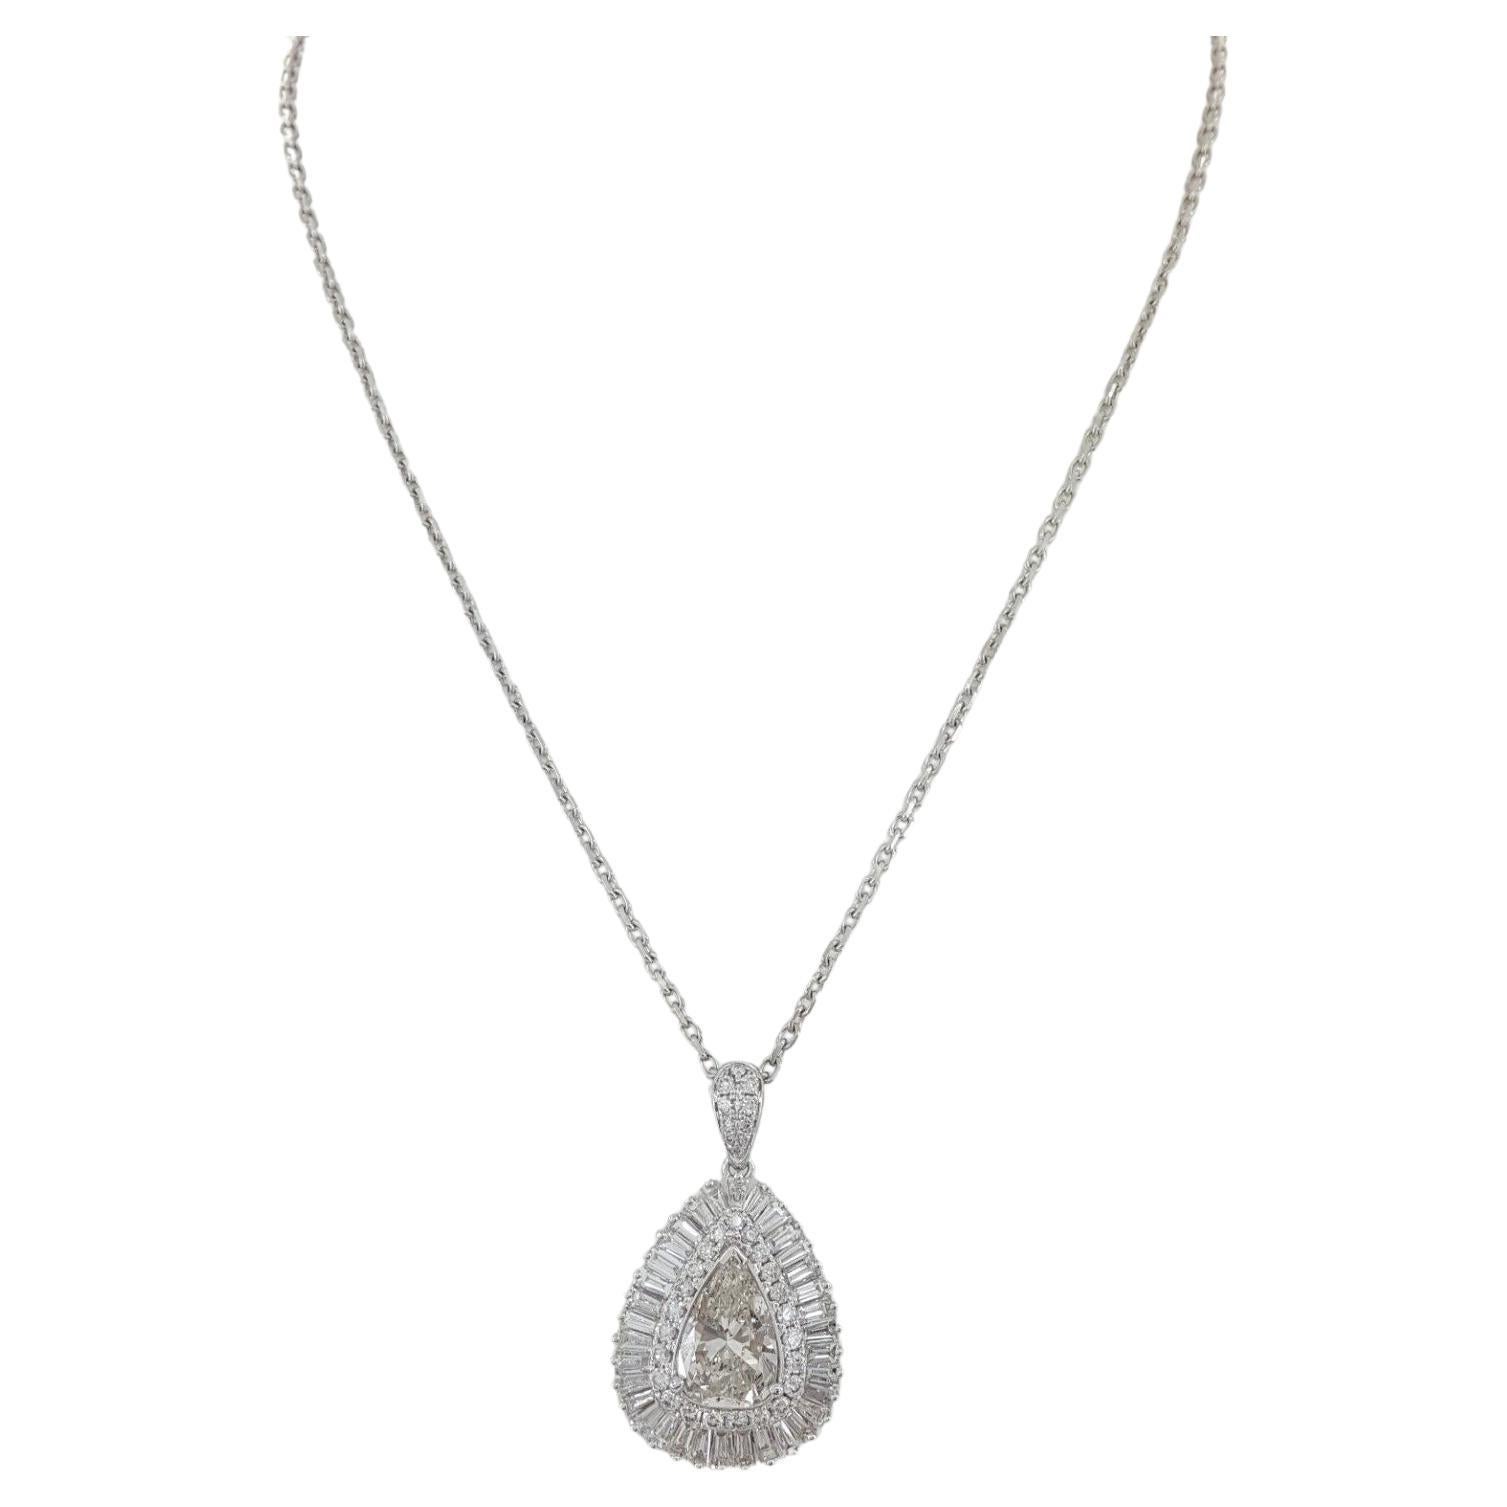 Antique 6 ct Total Weight Pear Brilliant, Baguette & Round Cut Diamonds Ballerina Halo Pendant/Necklace in 18k White Gold.

Weighing 11.4 grams and measuring 16 inches in length, this necklace features a central stone—a natural pear brilliant cut